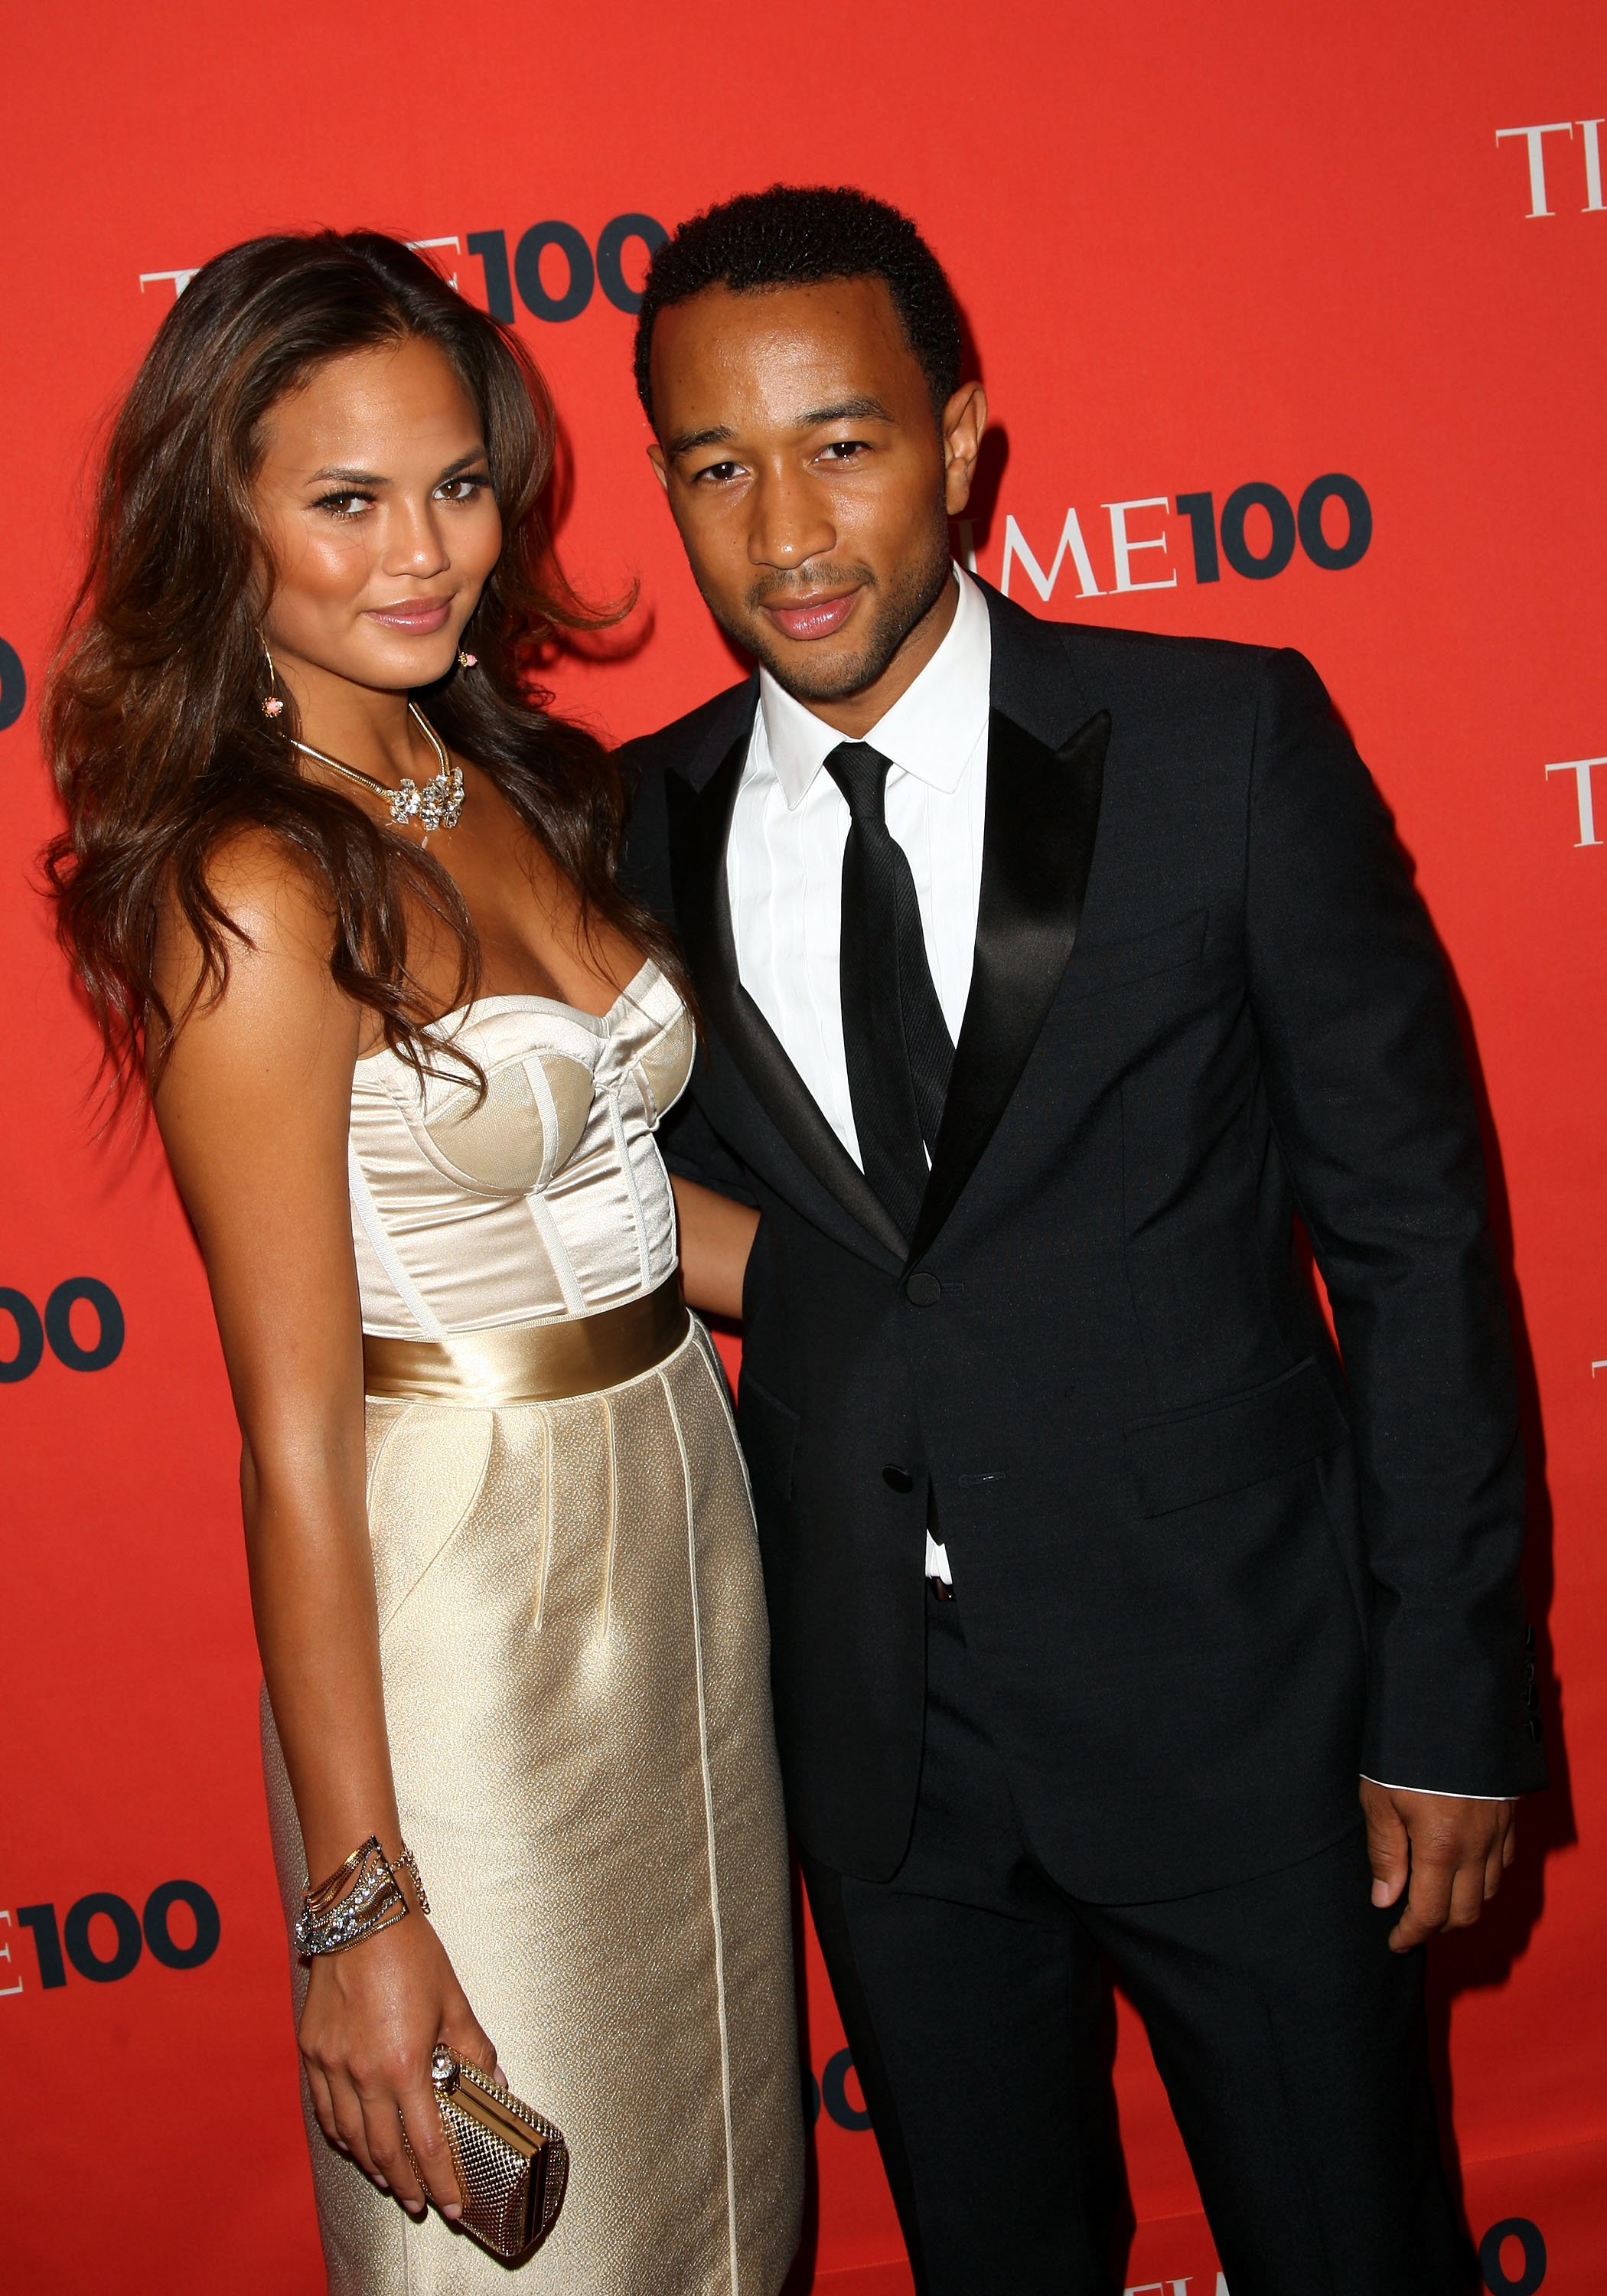 Chrissy Teigen and John Legend at Time's 100 Most Influential People in the World Gala in New York, on May 5, 2009. | Photo: Getty Images. 